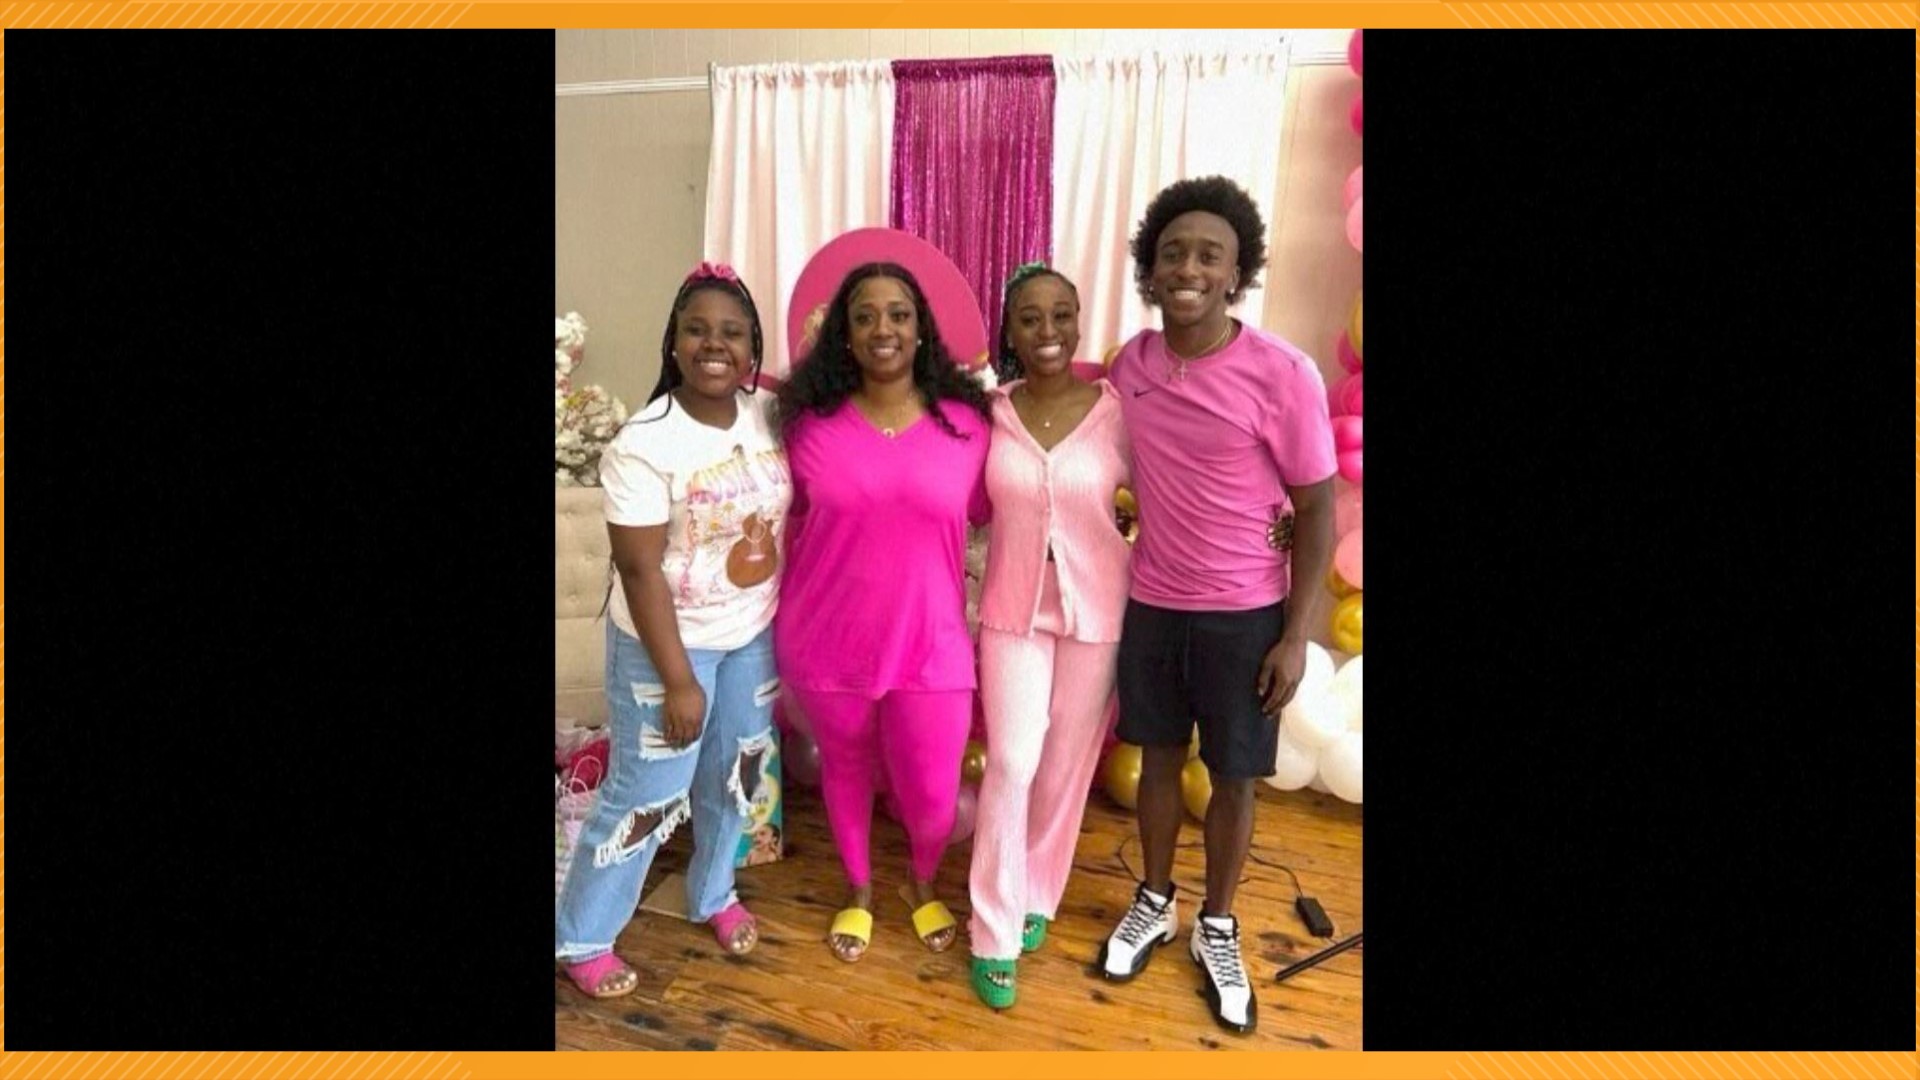 Alexis Dowdell was celebrating her 16th birthday when four people, including her brother, were killed, and more than 30 others injured.